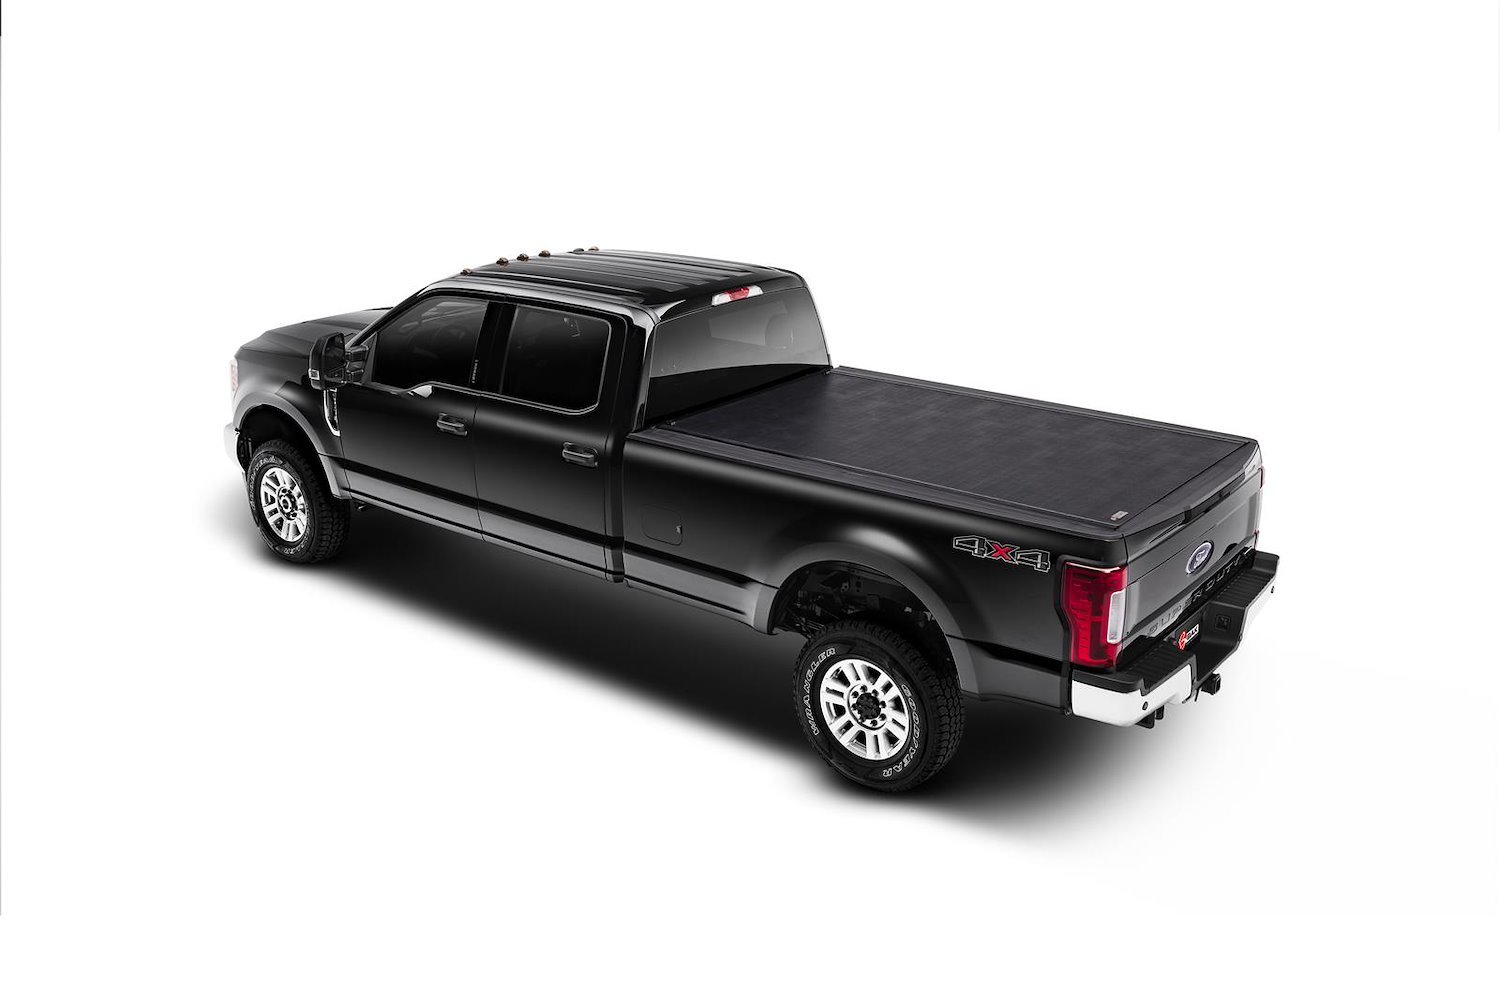 39330 Revolver X2 for Fits Select Ford Super-Duty 6.10 ft. Bed, Roll-Up Hard Cover Style [Black Finish]